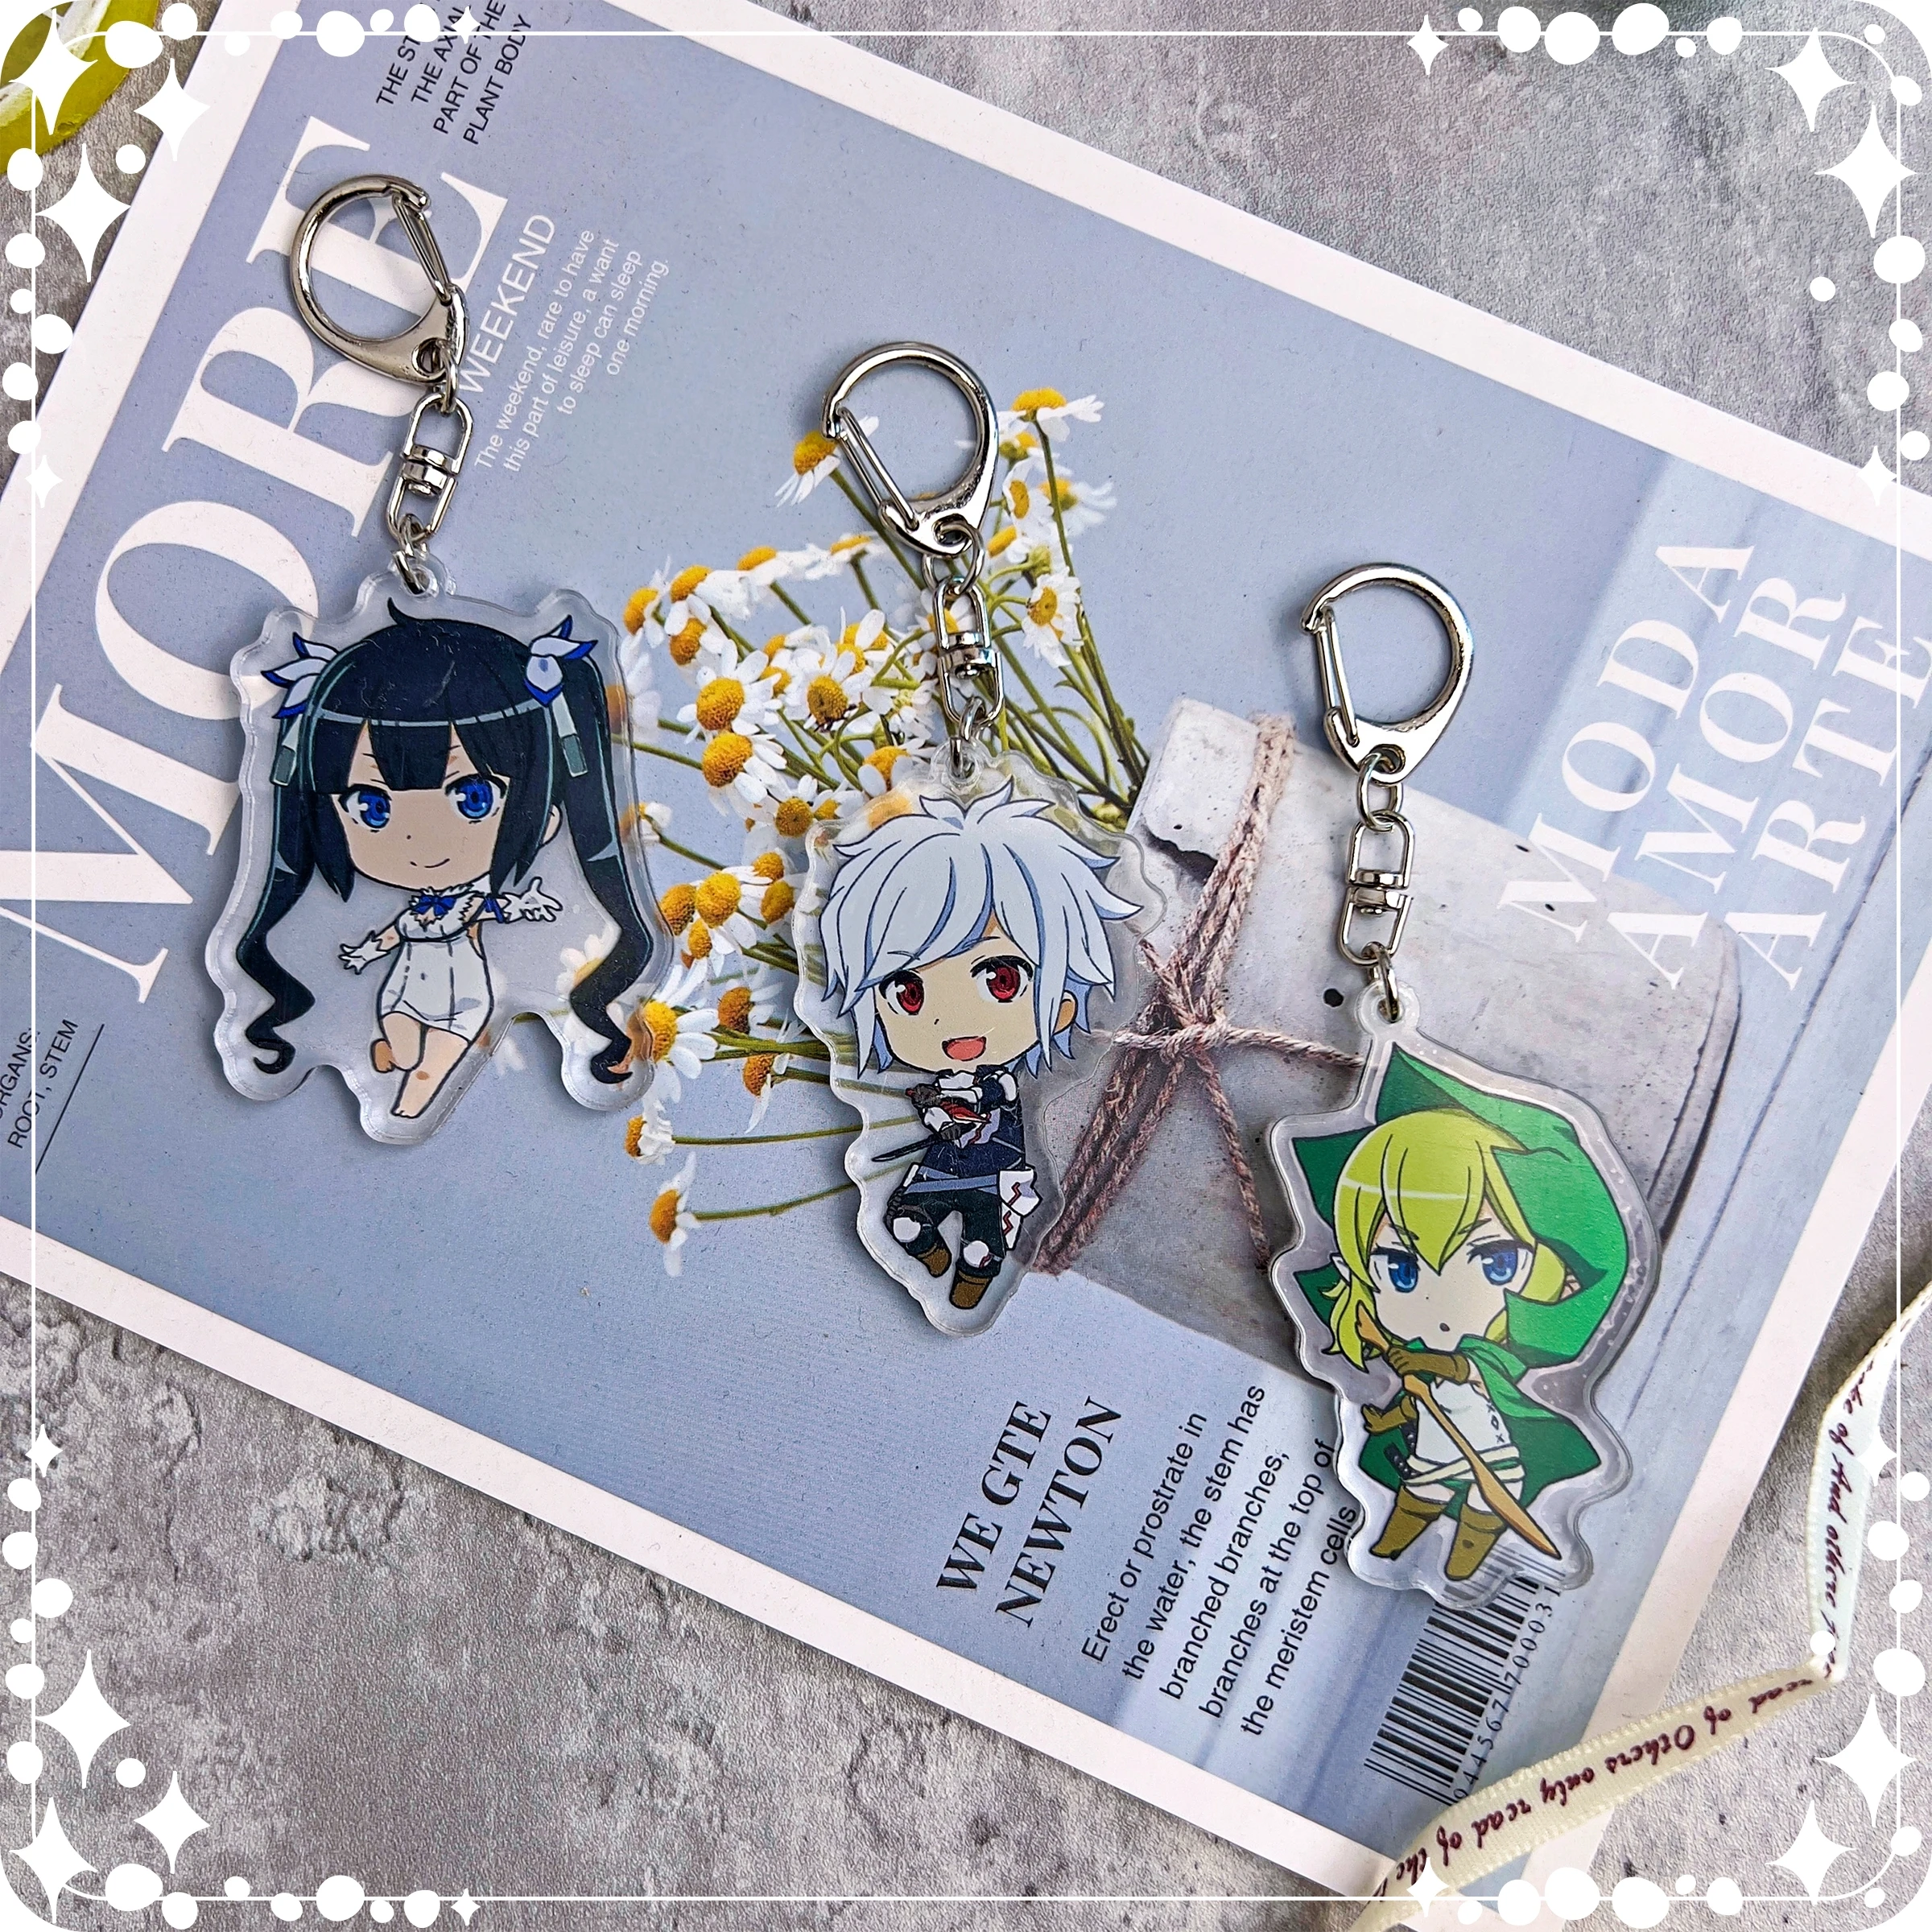 DanMachi Is It Wrong to Try to Pick Up Girls in a Dungeon Anime Keychain Jewelry Gift Original Accessories Firgures Car Cute Toy